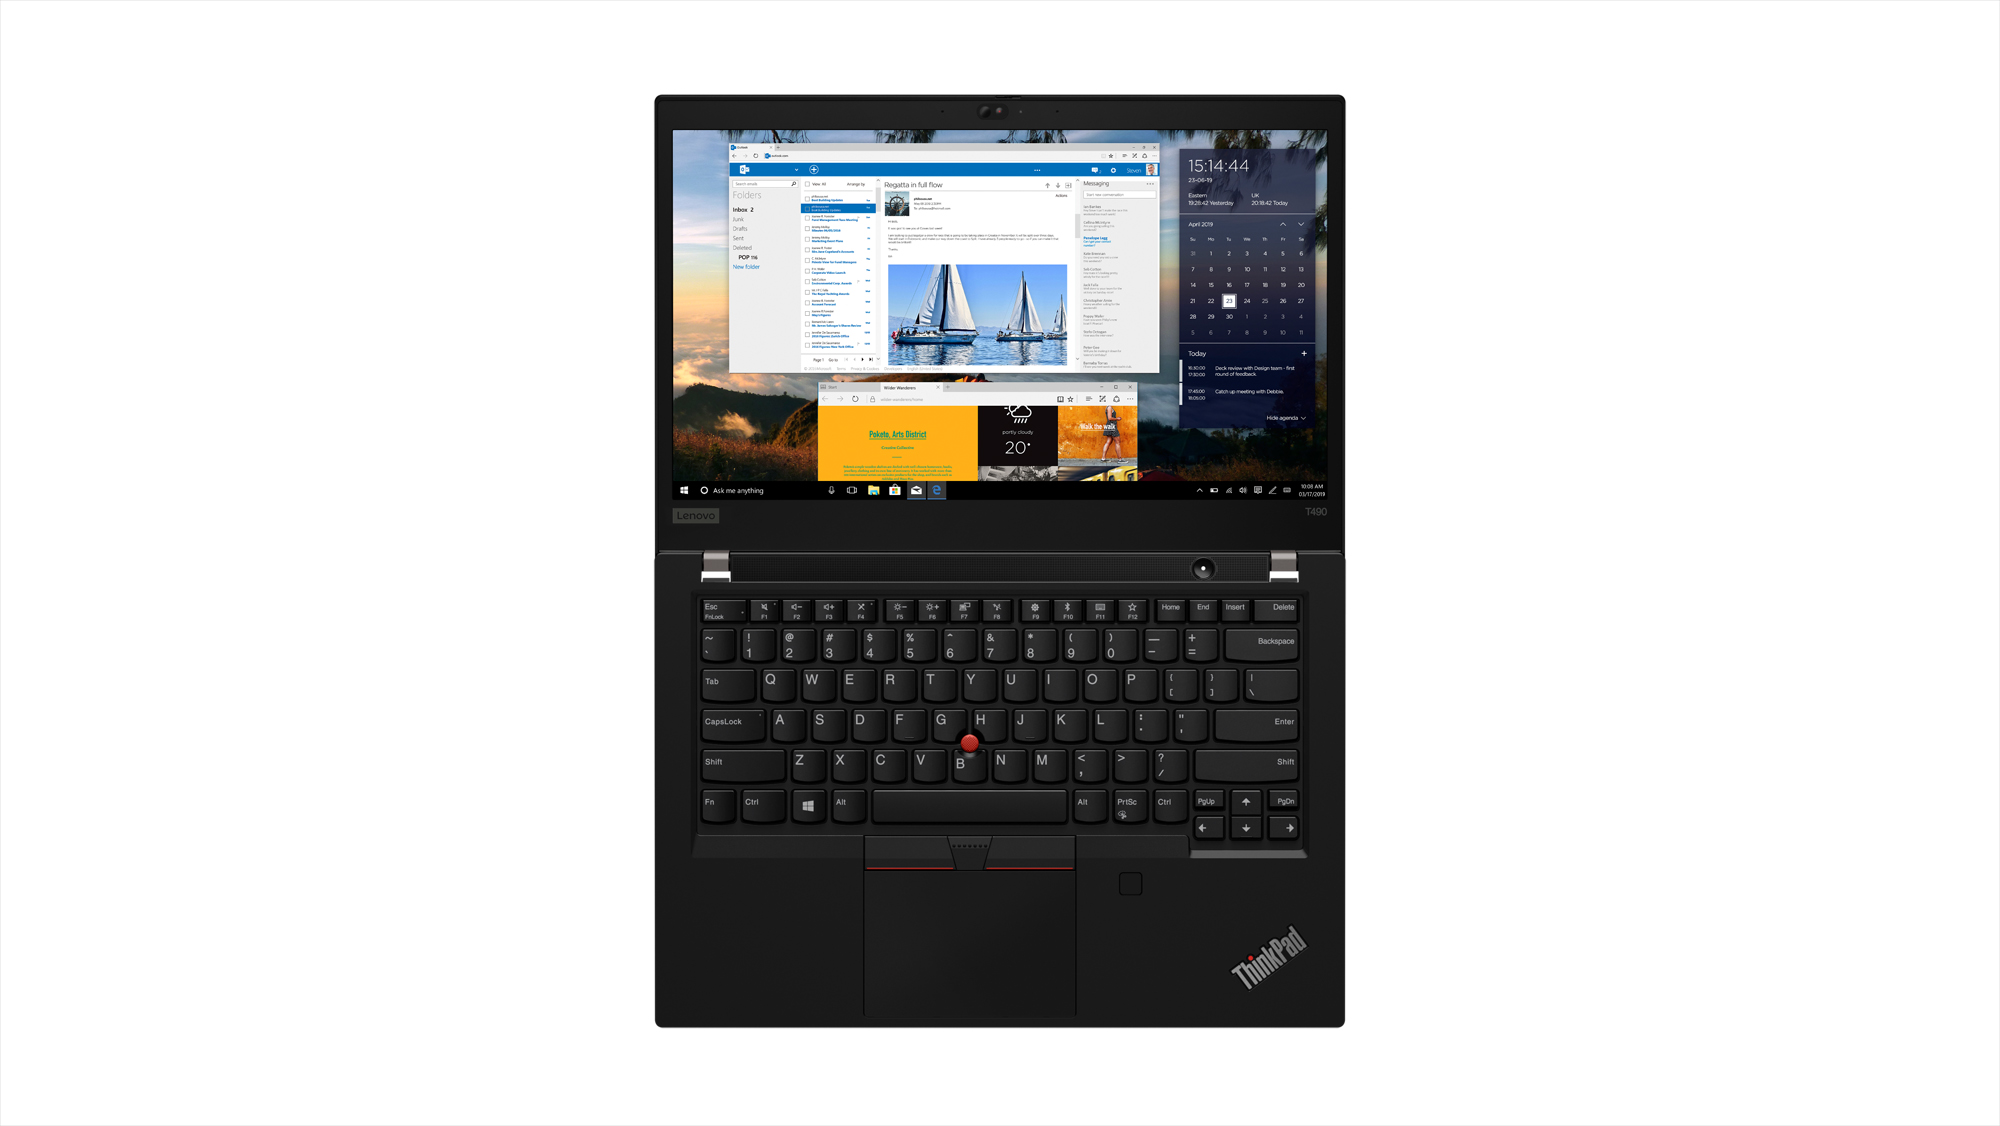 lenovo annouces new thinkpads with 10th gen cometlake thinkpad t490 6